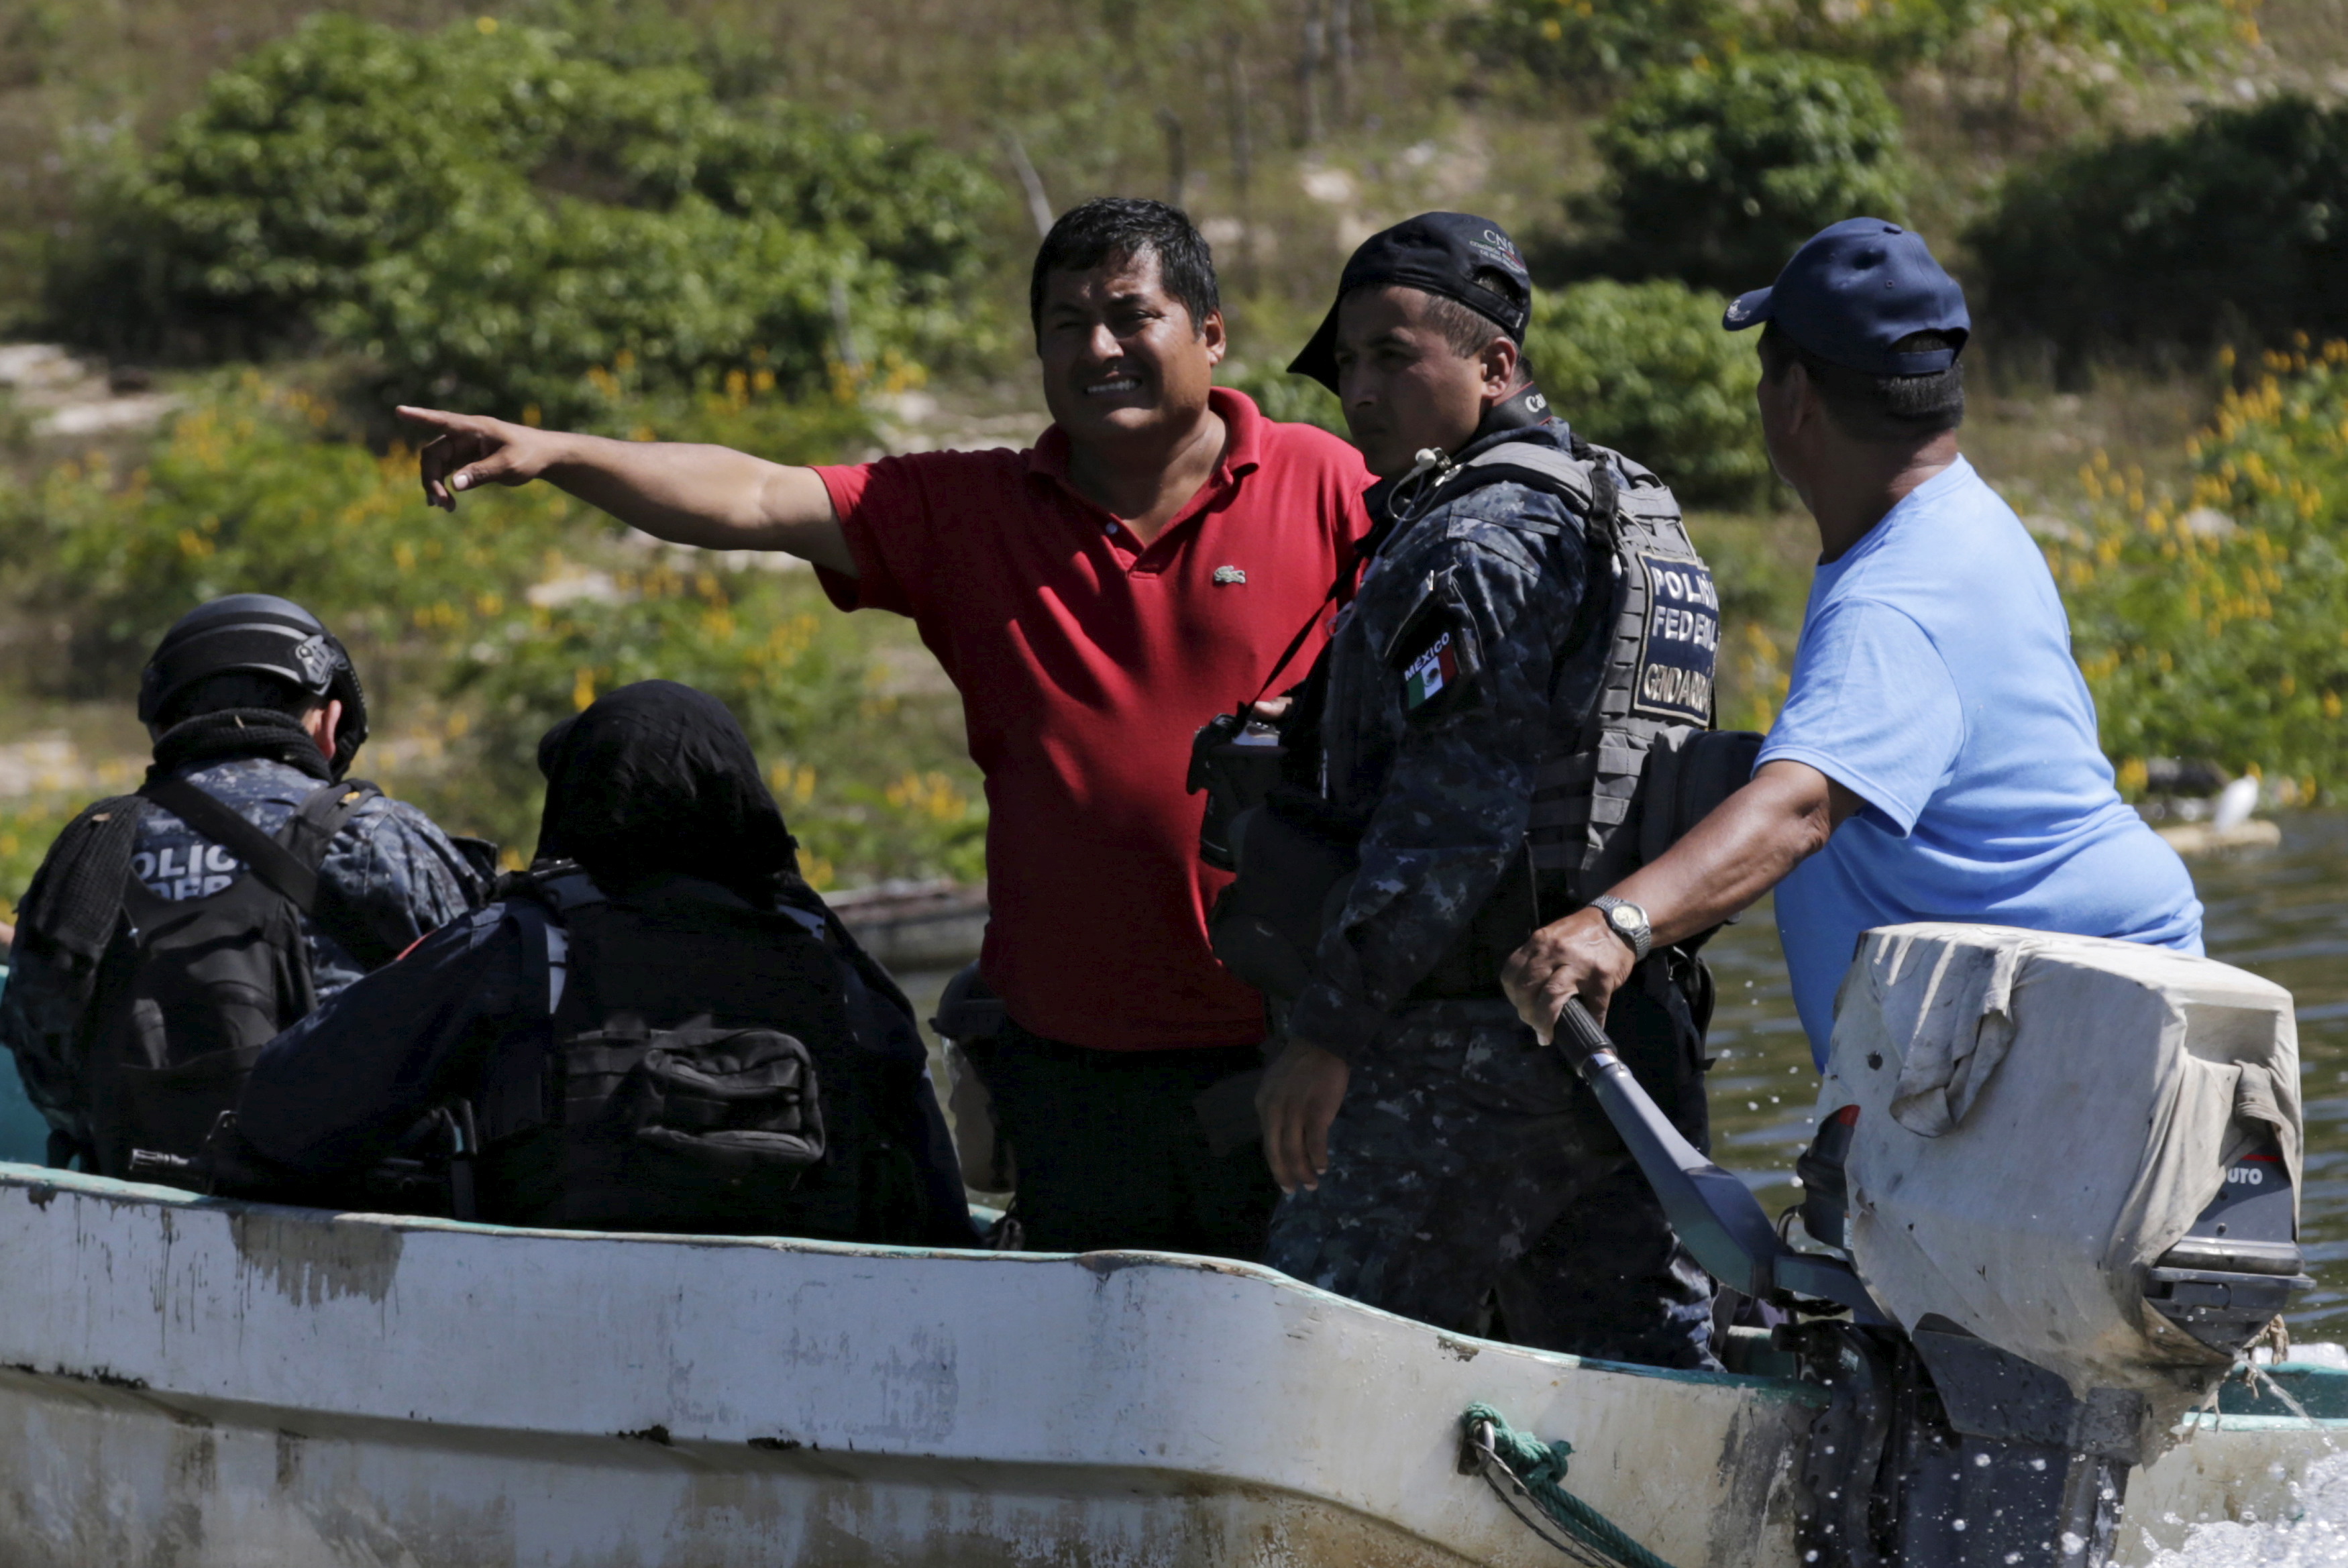 Miguel Angel Jimenez, leader of the community police of Guerrero State (UPOEG), speaks with a federal police on a boat as they seek for the 43 Ayotzinapa students' missing, in Acatlan, in the southwestern state of Guerrero